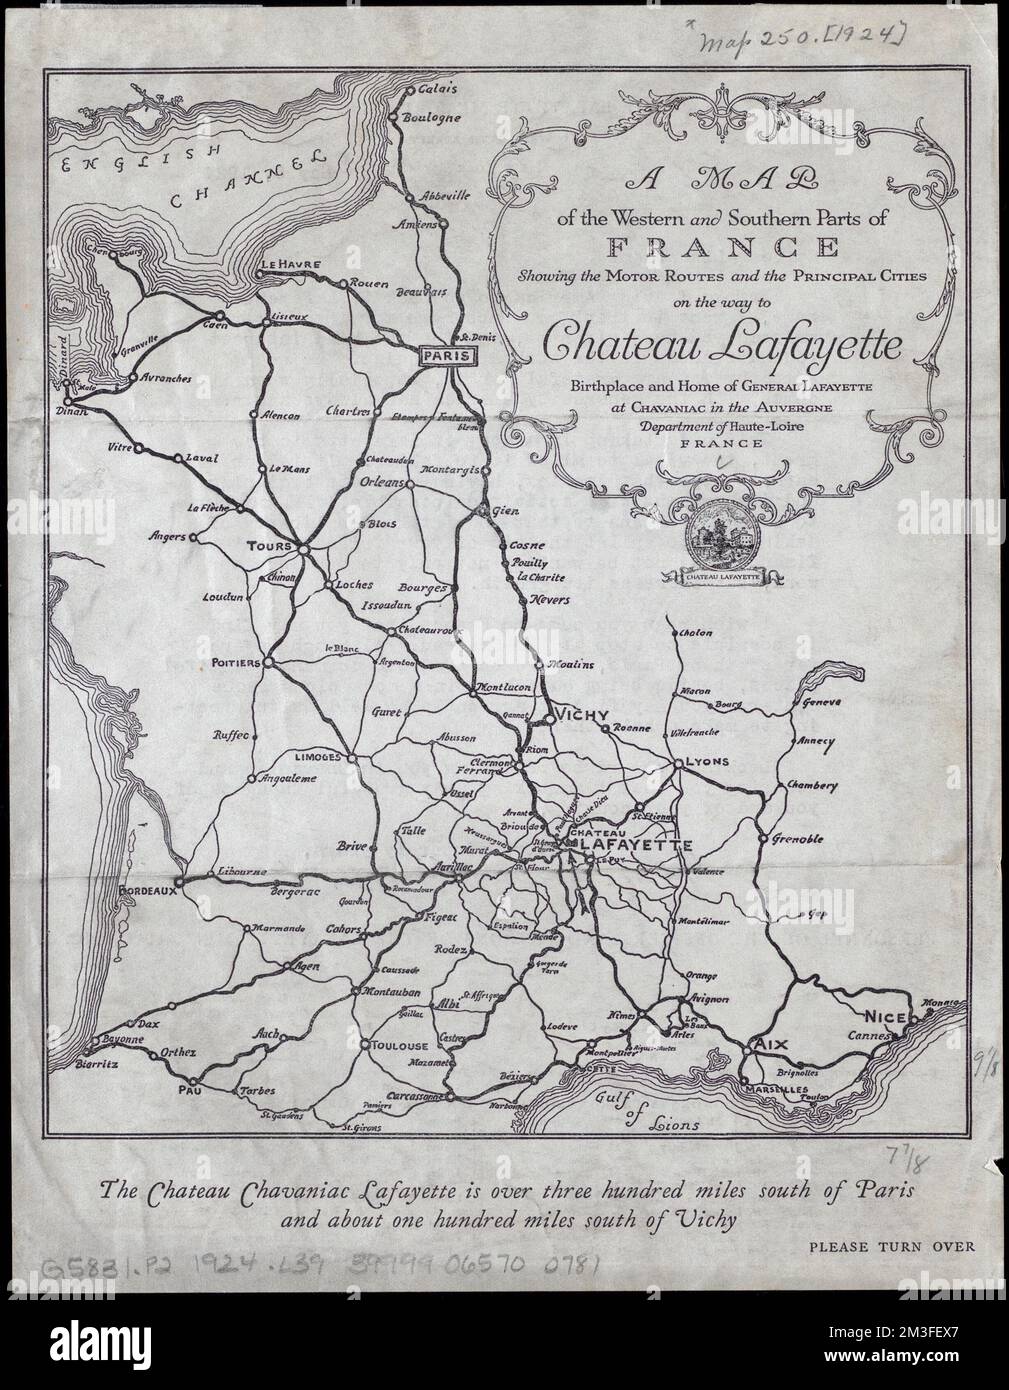 A map of the western and southern parts of France showing the motor routes and the principal cities on the way to Chateau Lafayette : birthplace and home of General Lafayette at Chavaniac in the Auvergne Department of Haute-Loire, France , France, Maps, Roads, France, Maps Norman B. Leventhal Map Center Collection Stock Photo